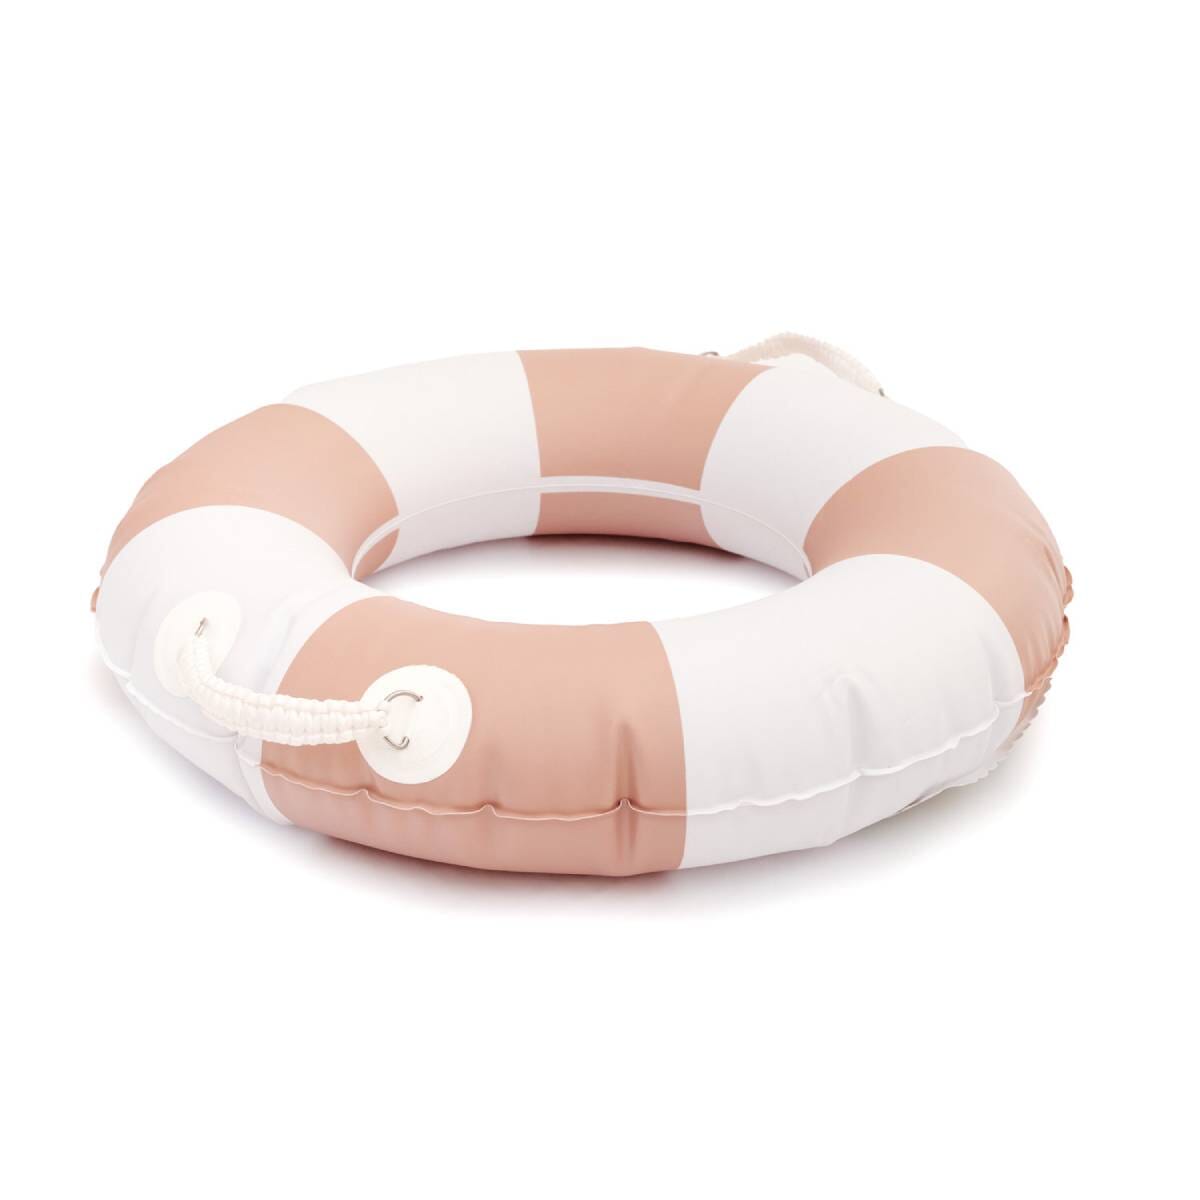 The Classic Pool Float - Small - Dusty Pink Pool Float Business & Pleasure Co Aus 